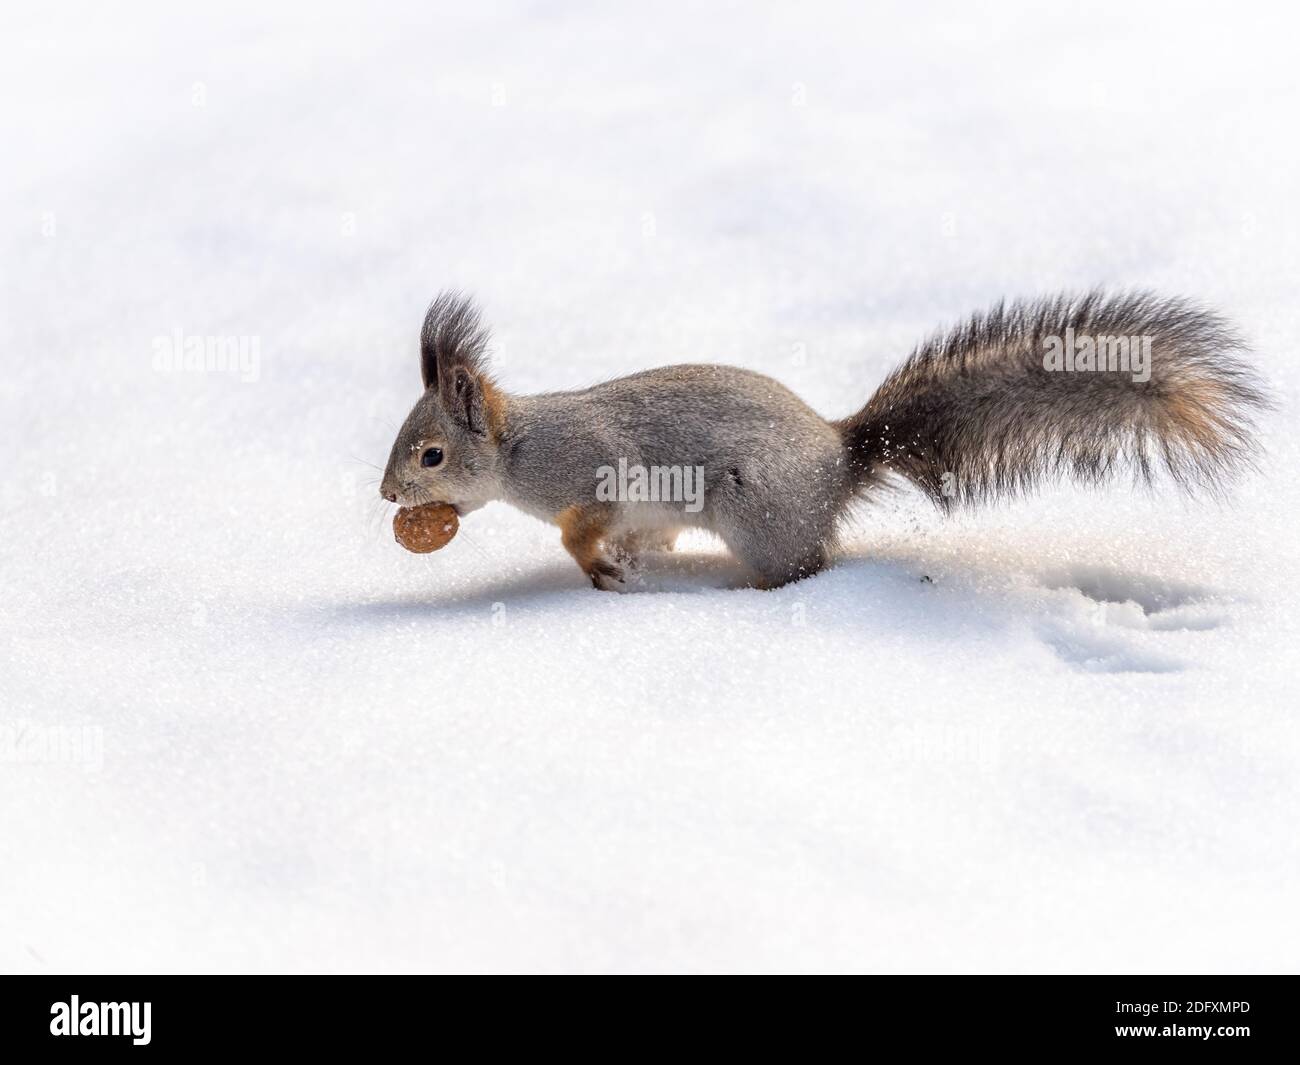 A squirrel with a walnut in its teeth quickly runs through the white snow in winter forest. Eurasian red squirrel, Sciurus vulgaris Stock Photo